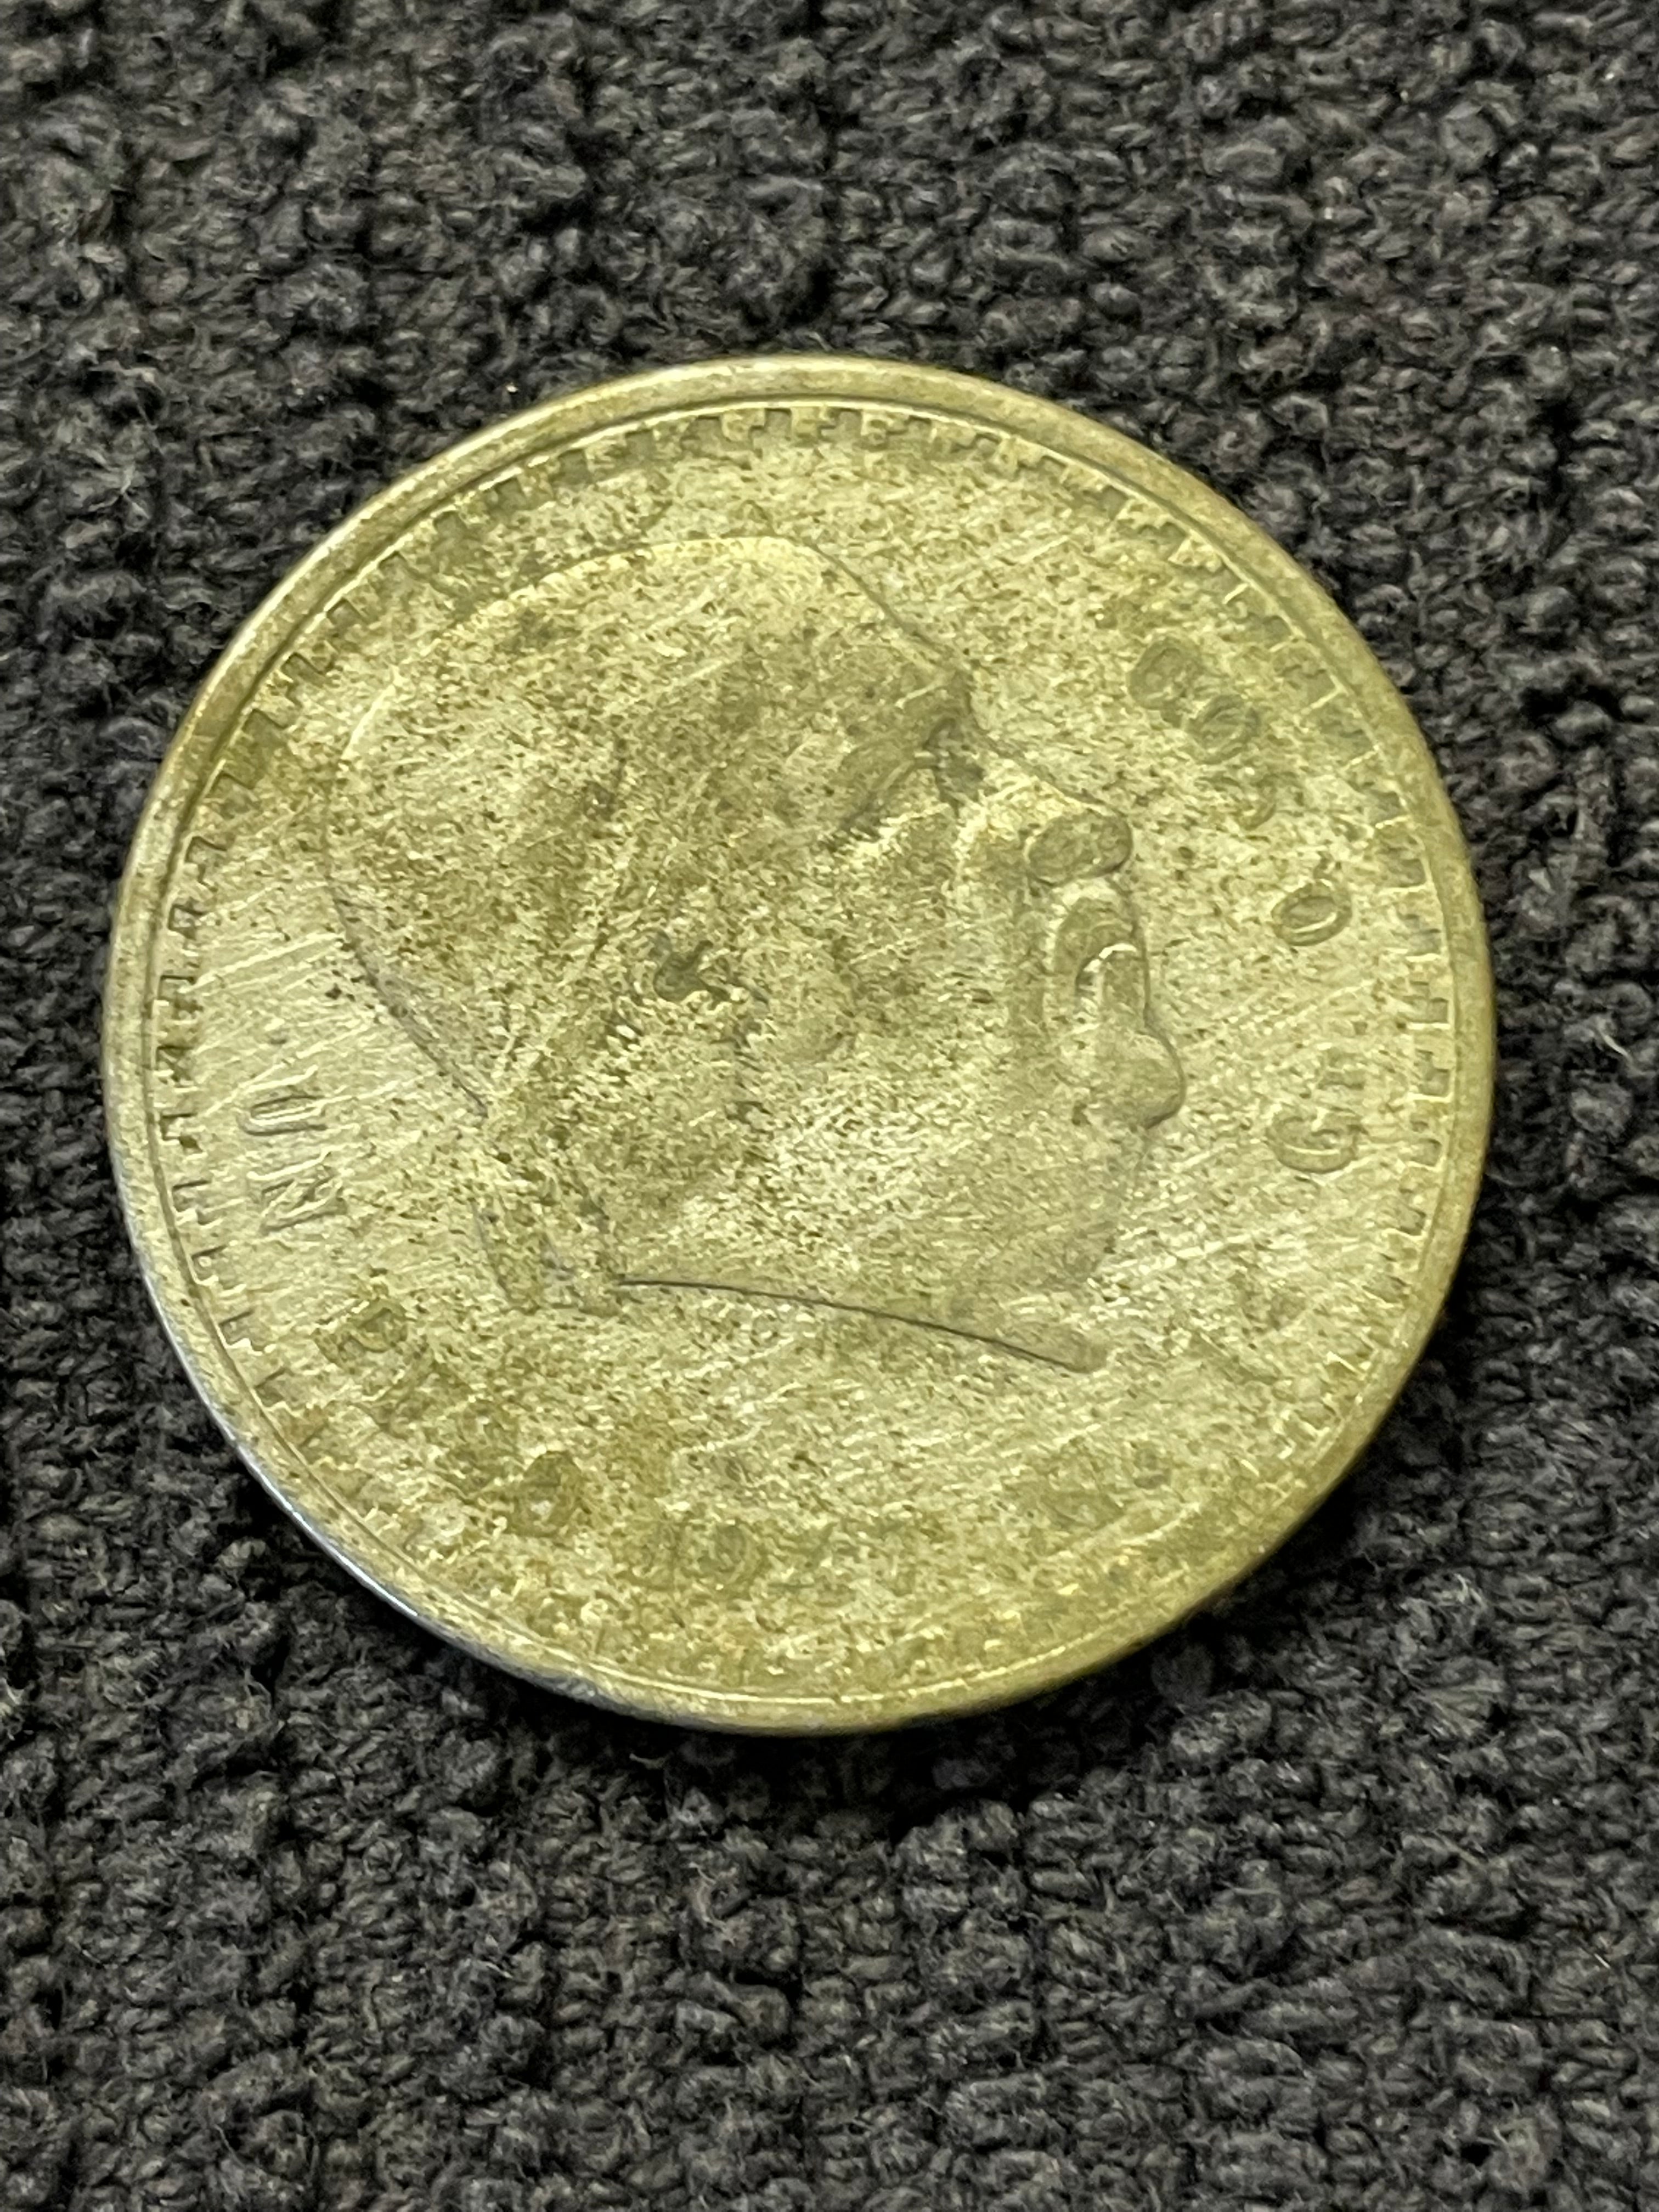 Foreign Silver Coin Found in Kansas City by Local Metal Detectorist